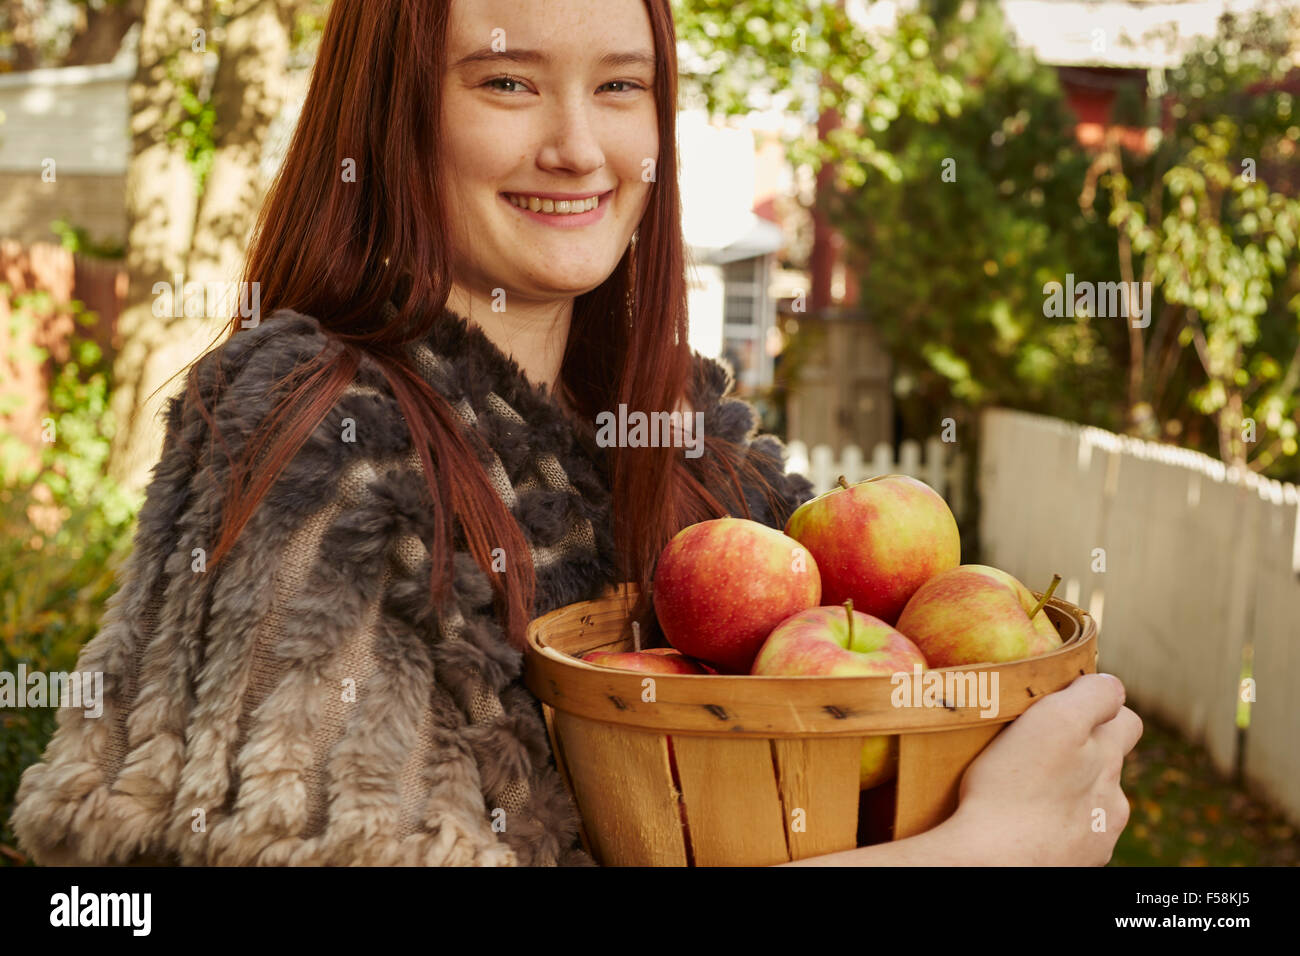 Young Woman With Basket of Apples Stock Photo